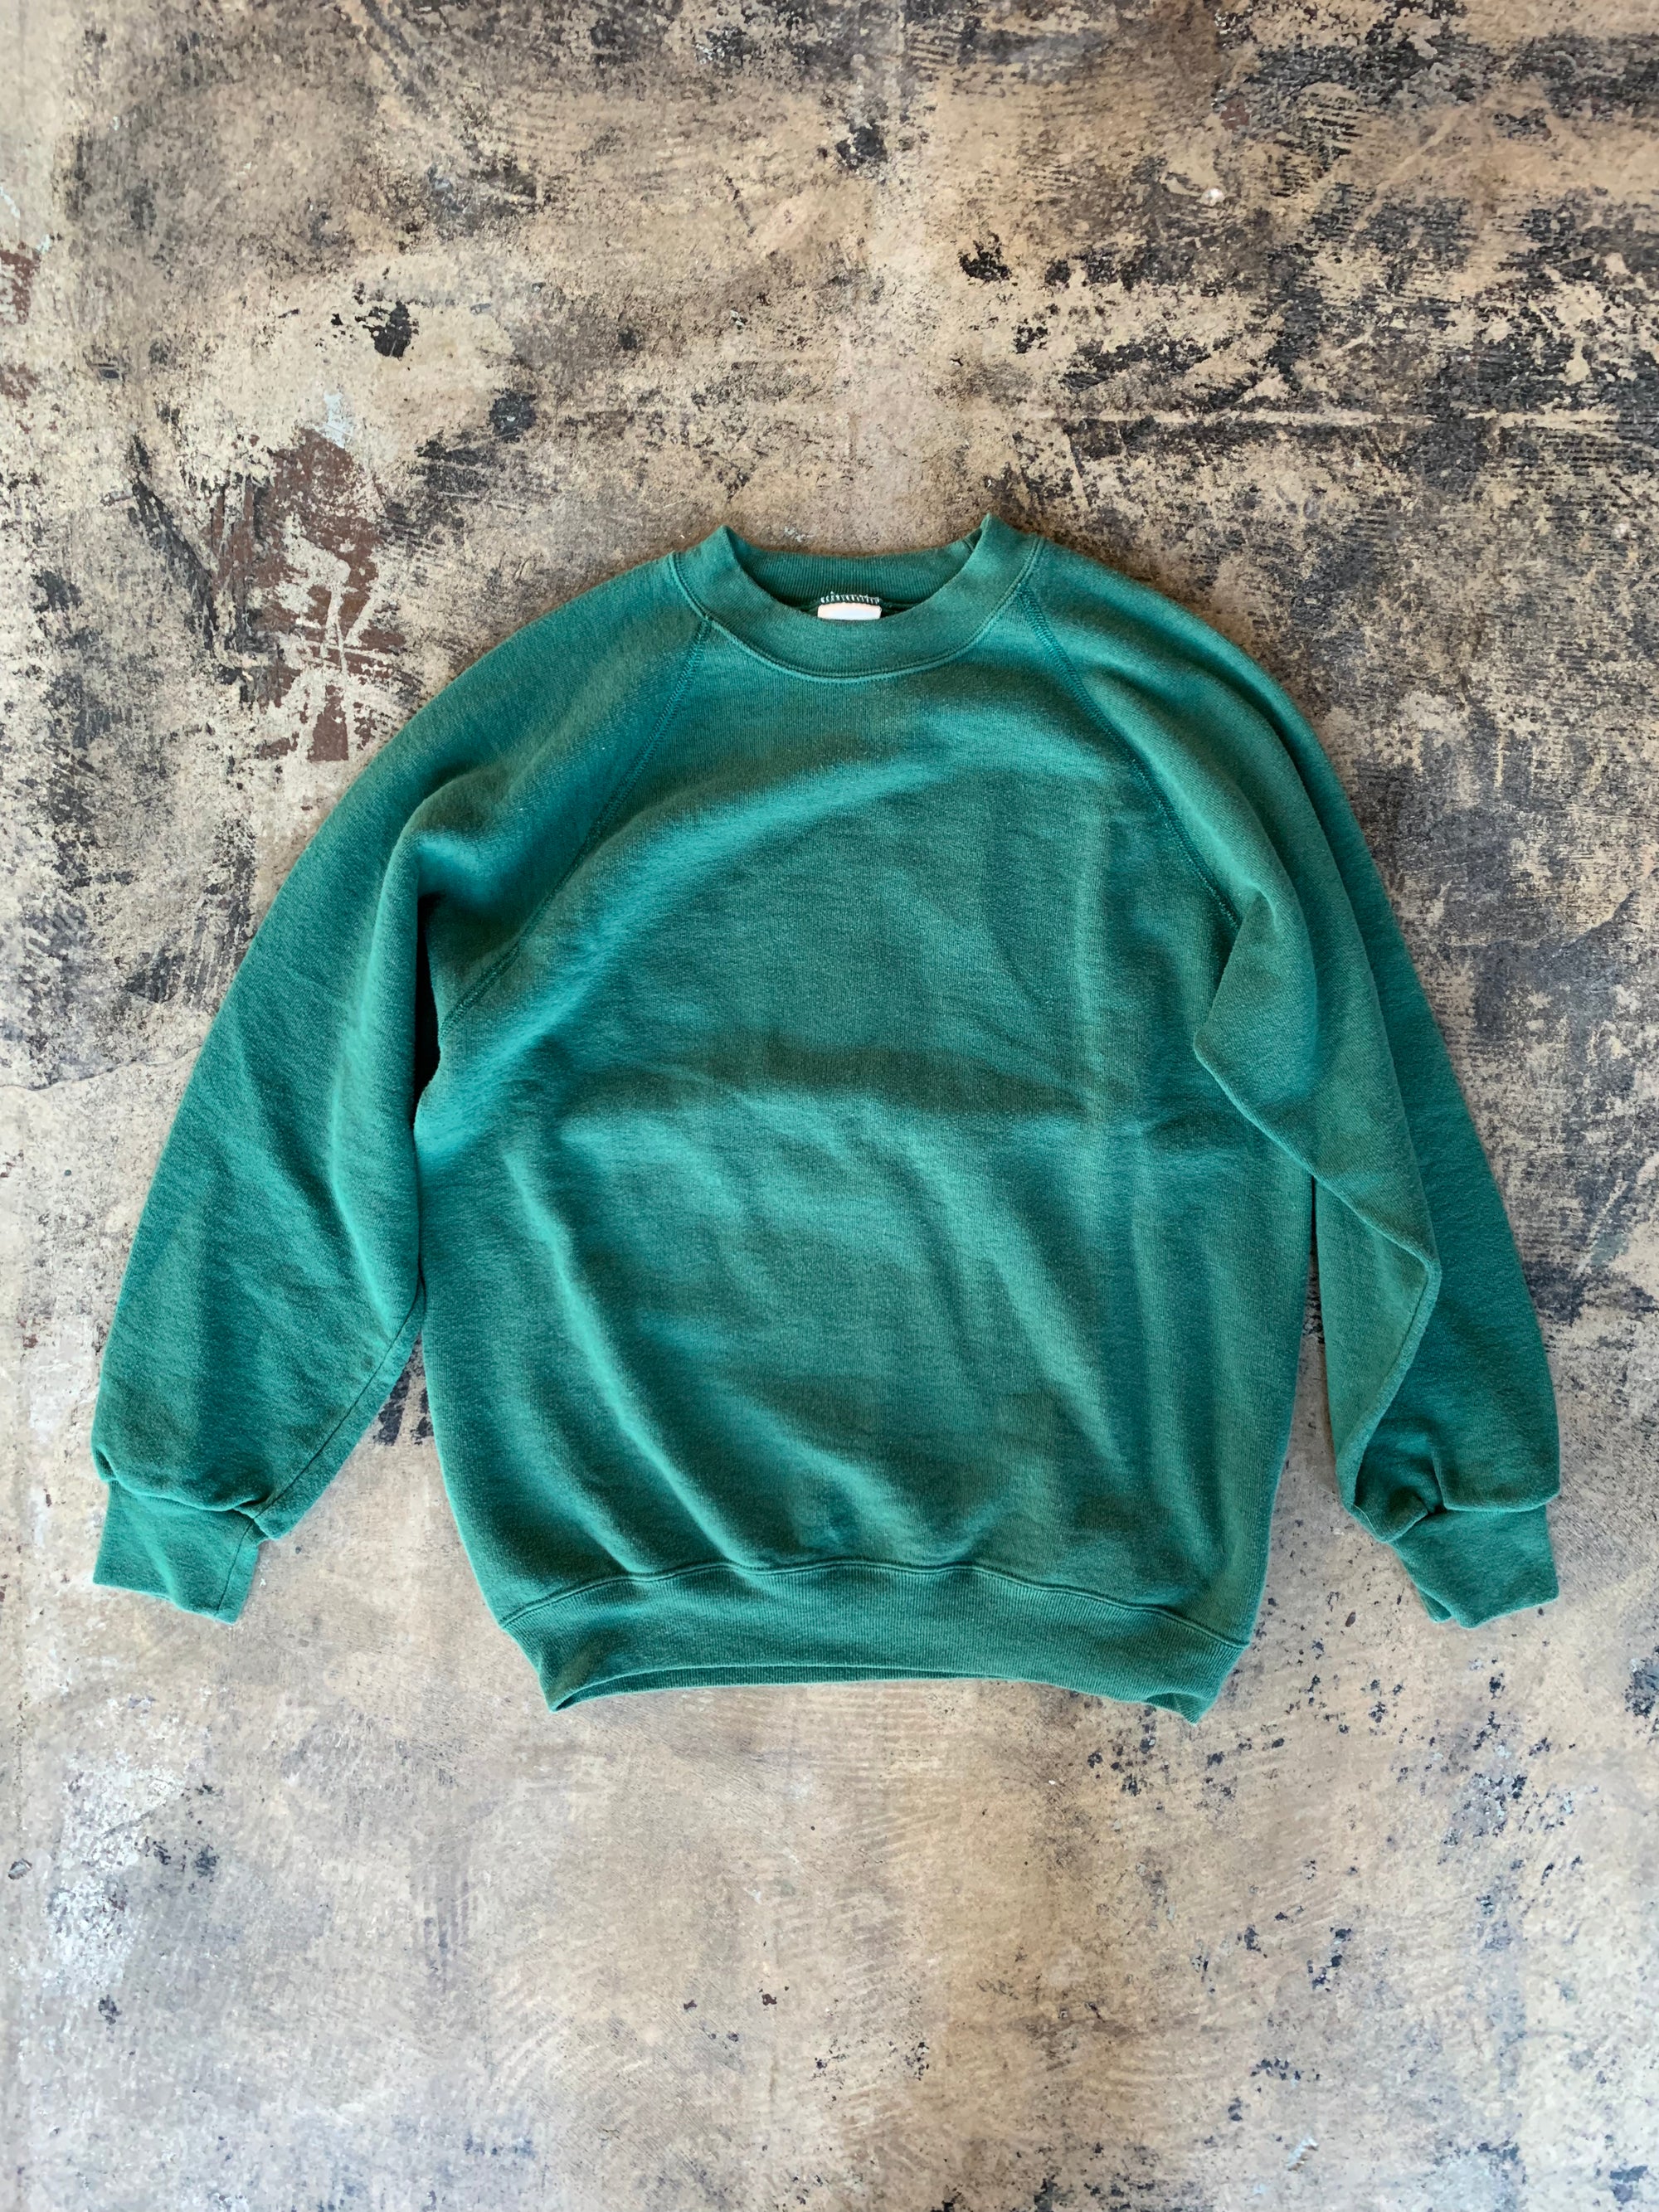 Vintage 80s French Army Crewneck